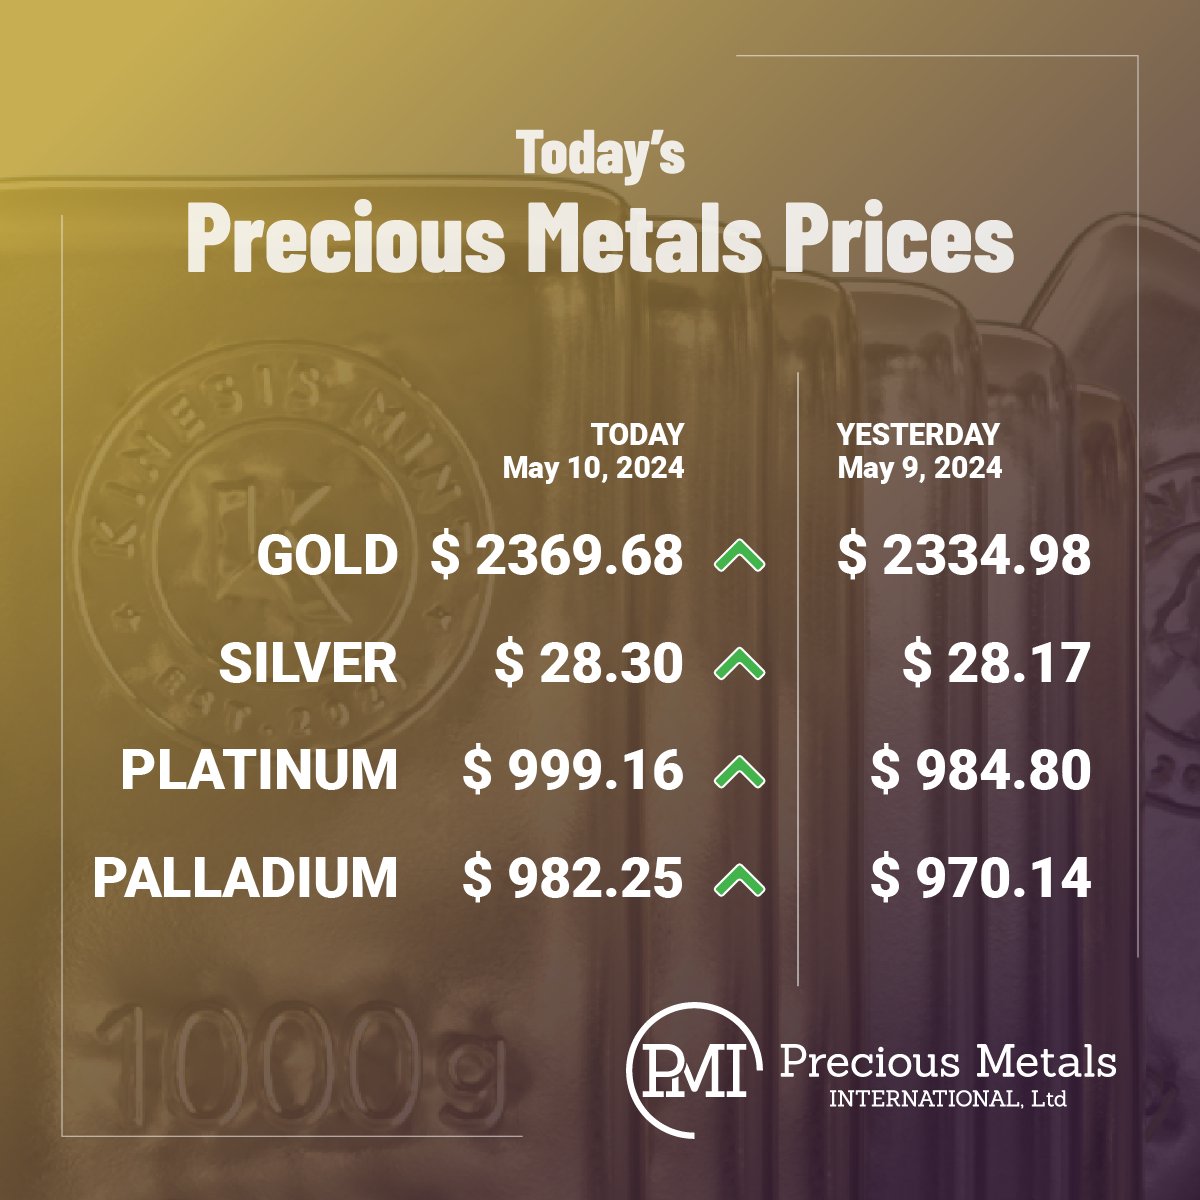 Today’s precious metals prices as of Friday, May 10th, 2024.
·
·
·
#BullionPMI #Gold #Silver #Platinum #Palladium #PreciousMetals #Prices #BuyGold #BuySilver #InGoldWeTrust 🥇💛🟡🌕🟨🪙⬜️🔘◻️📈✨🤯👍🏼🔥